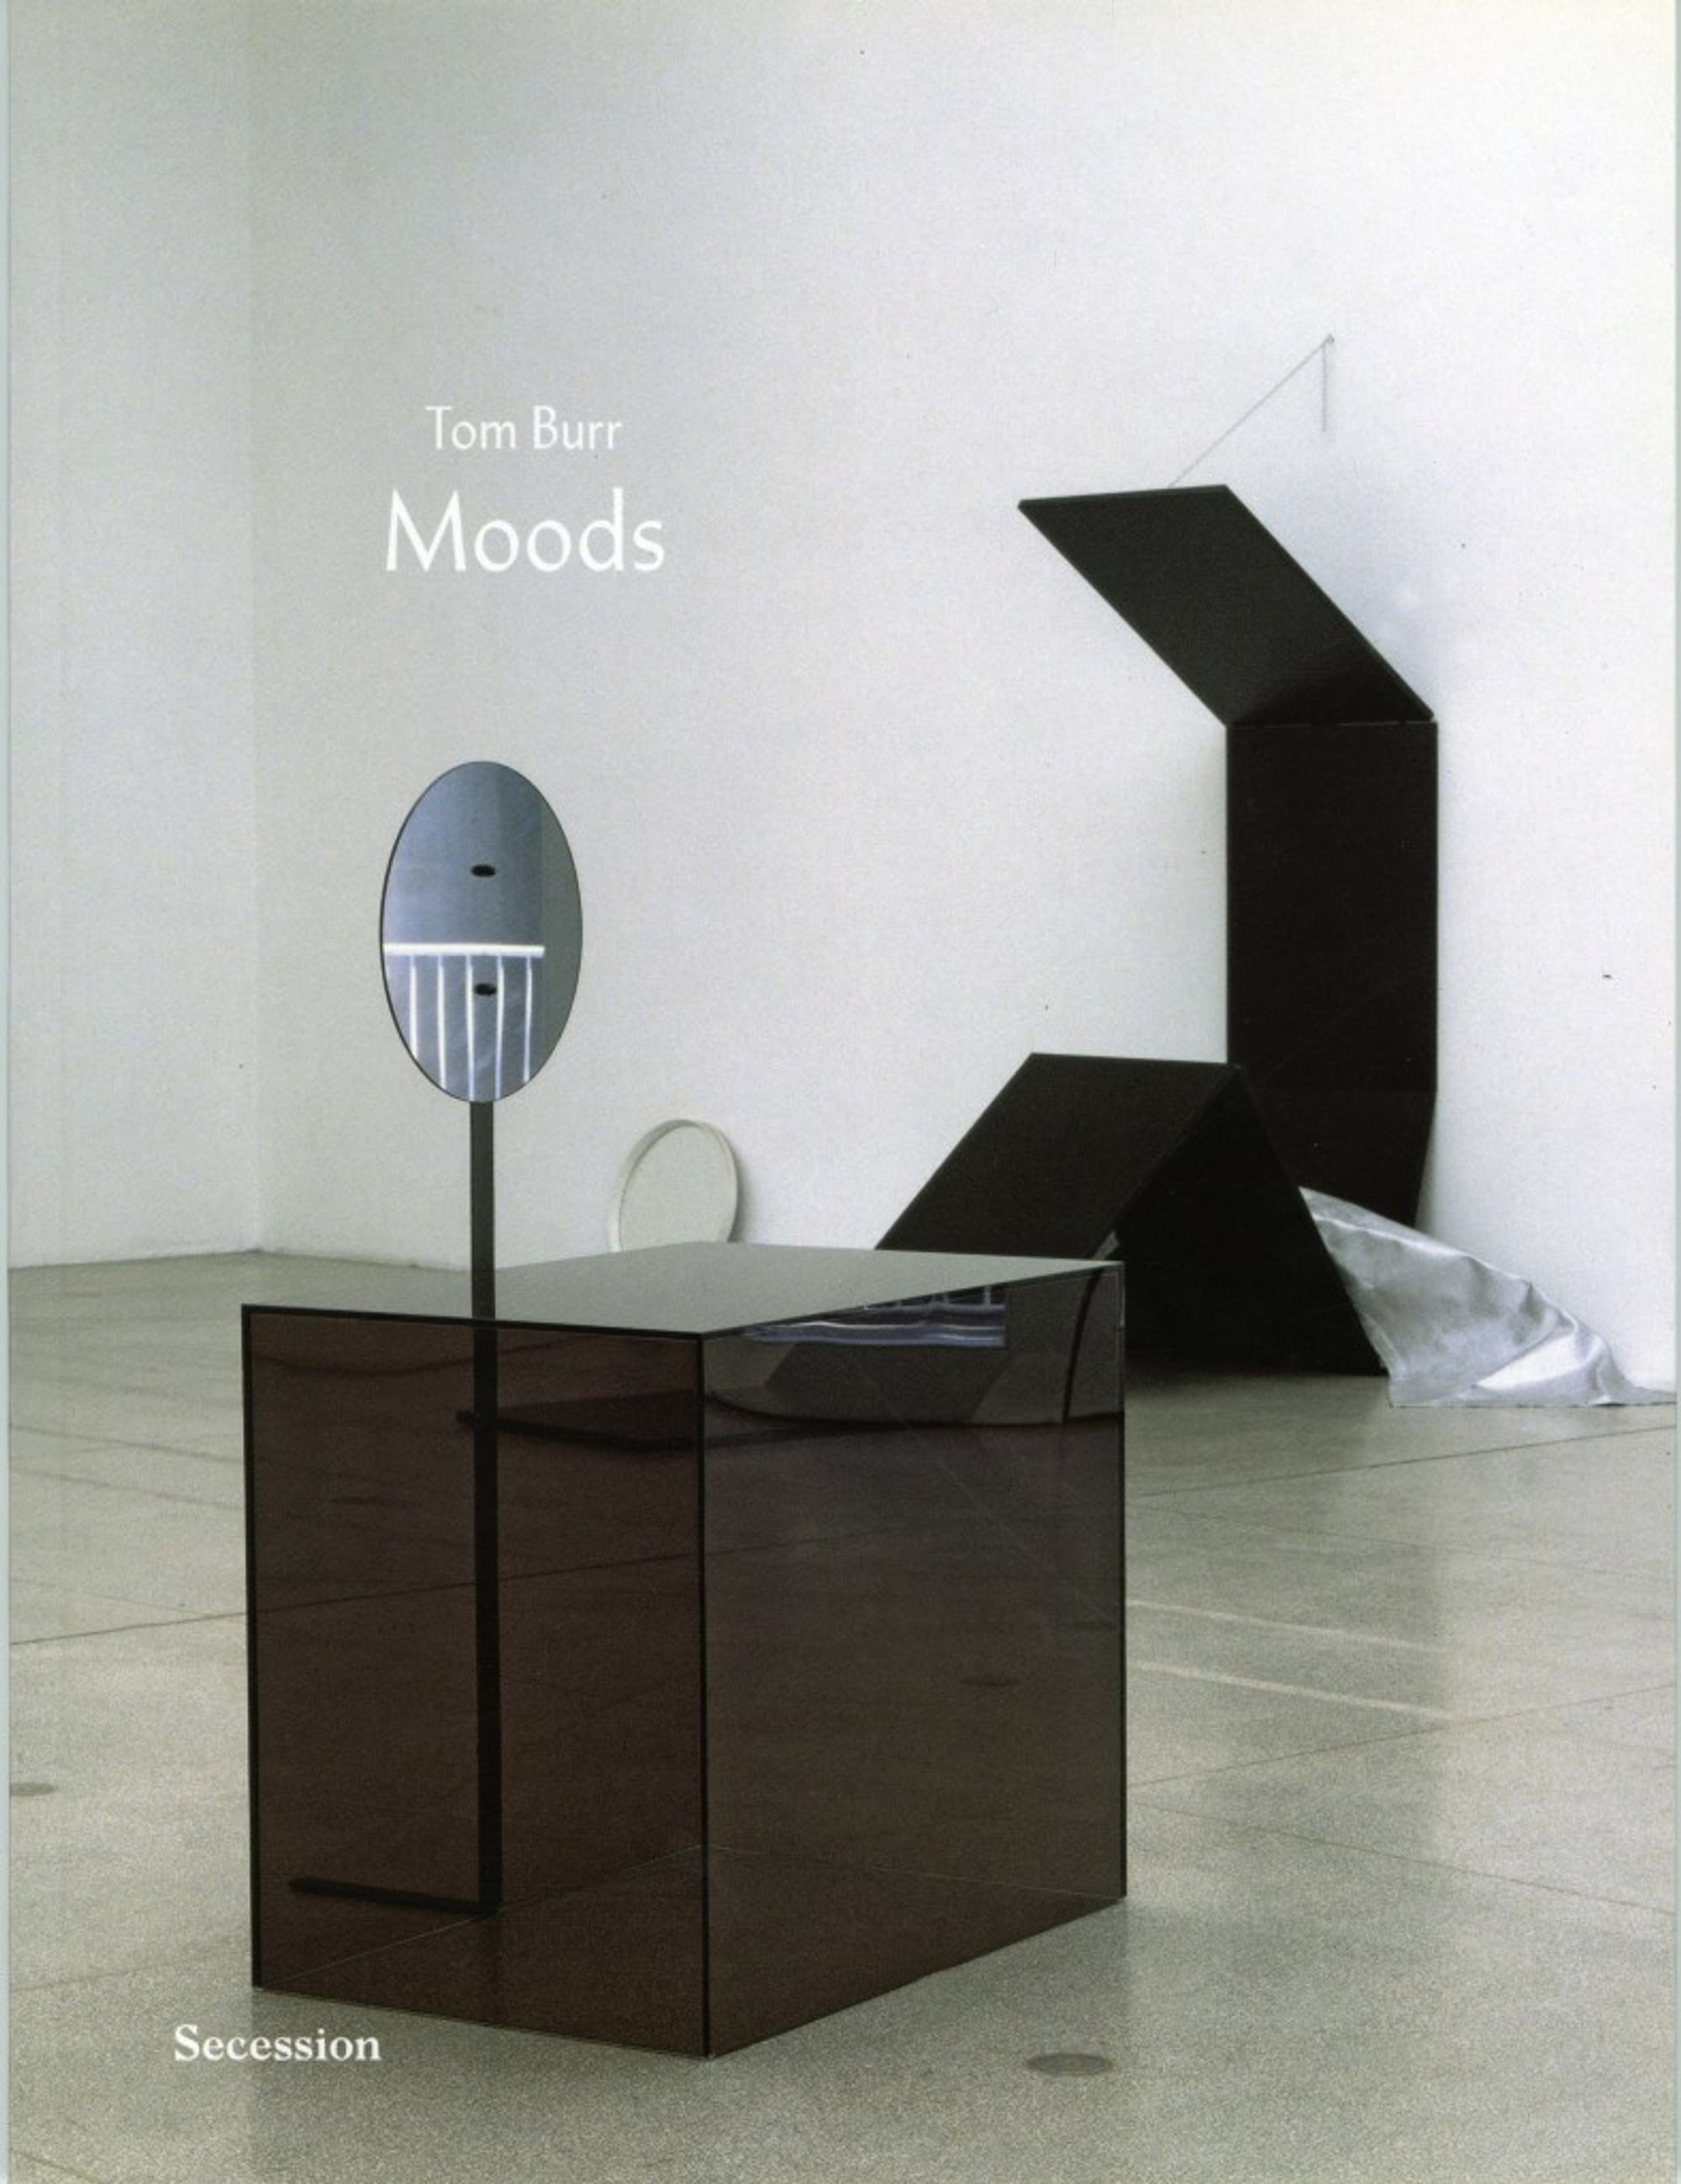 Detail view of Tom Burr: Moods against a plain gray background